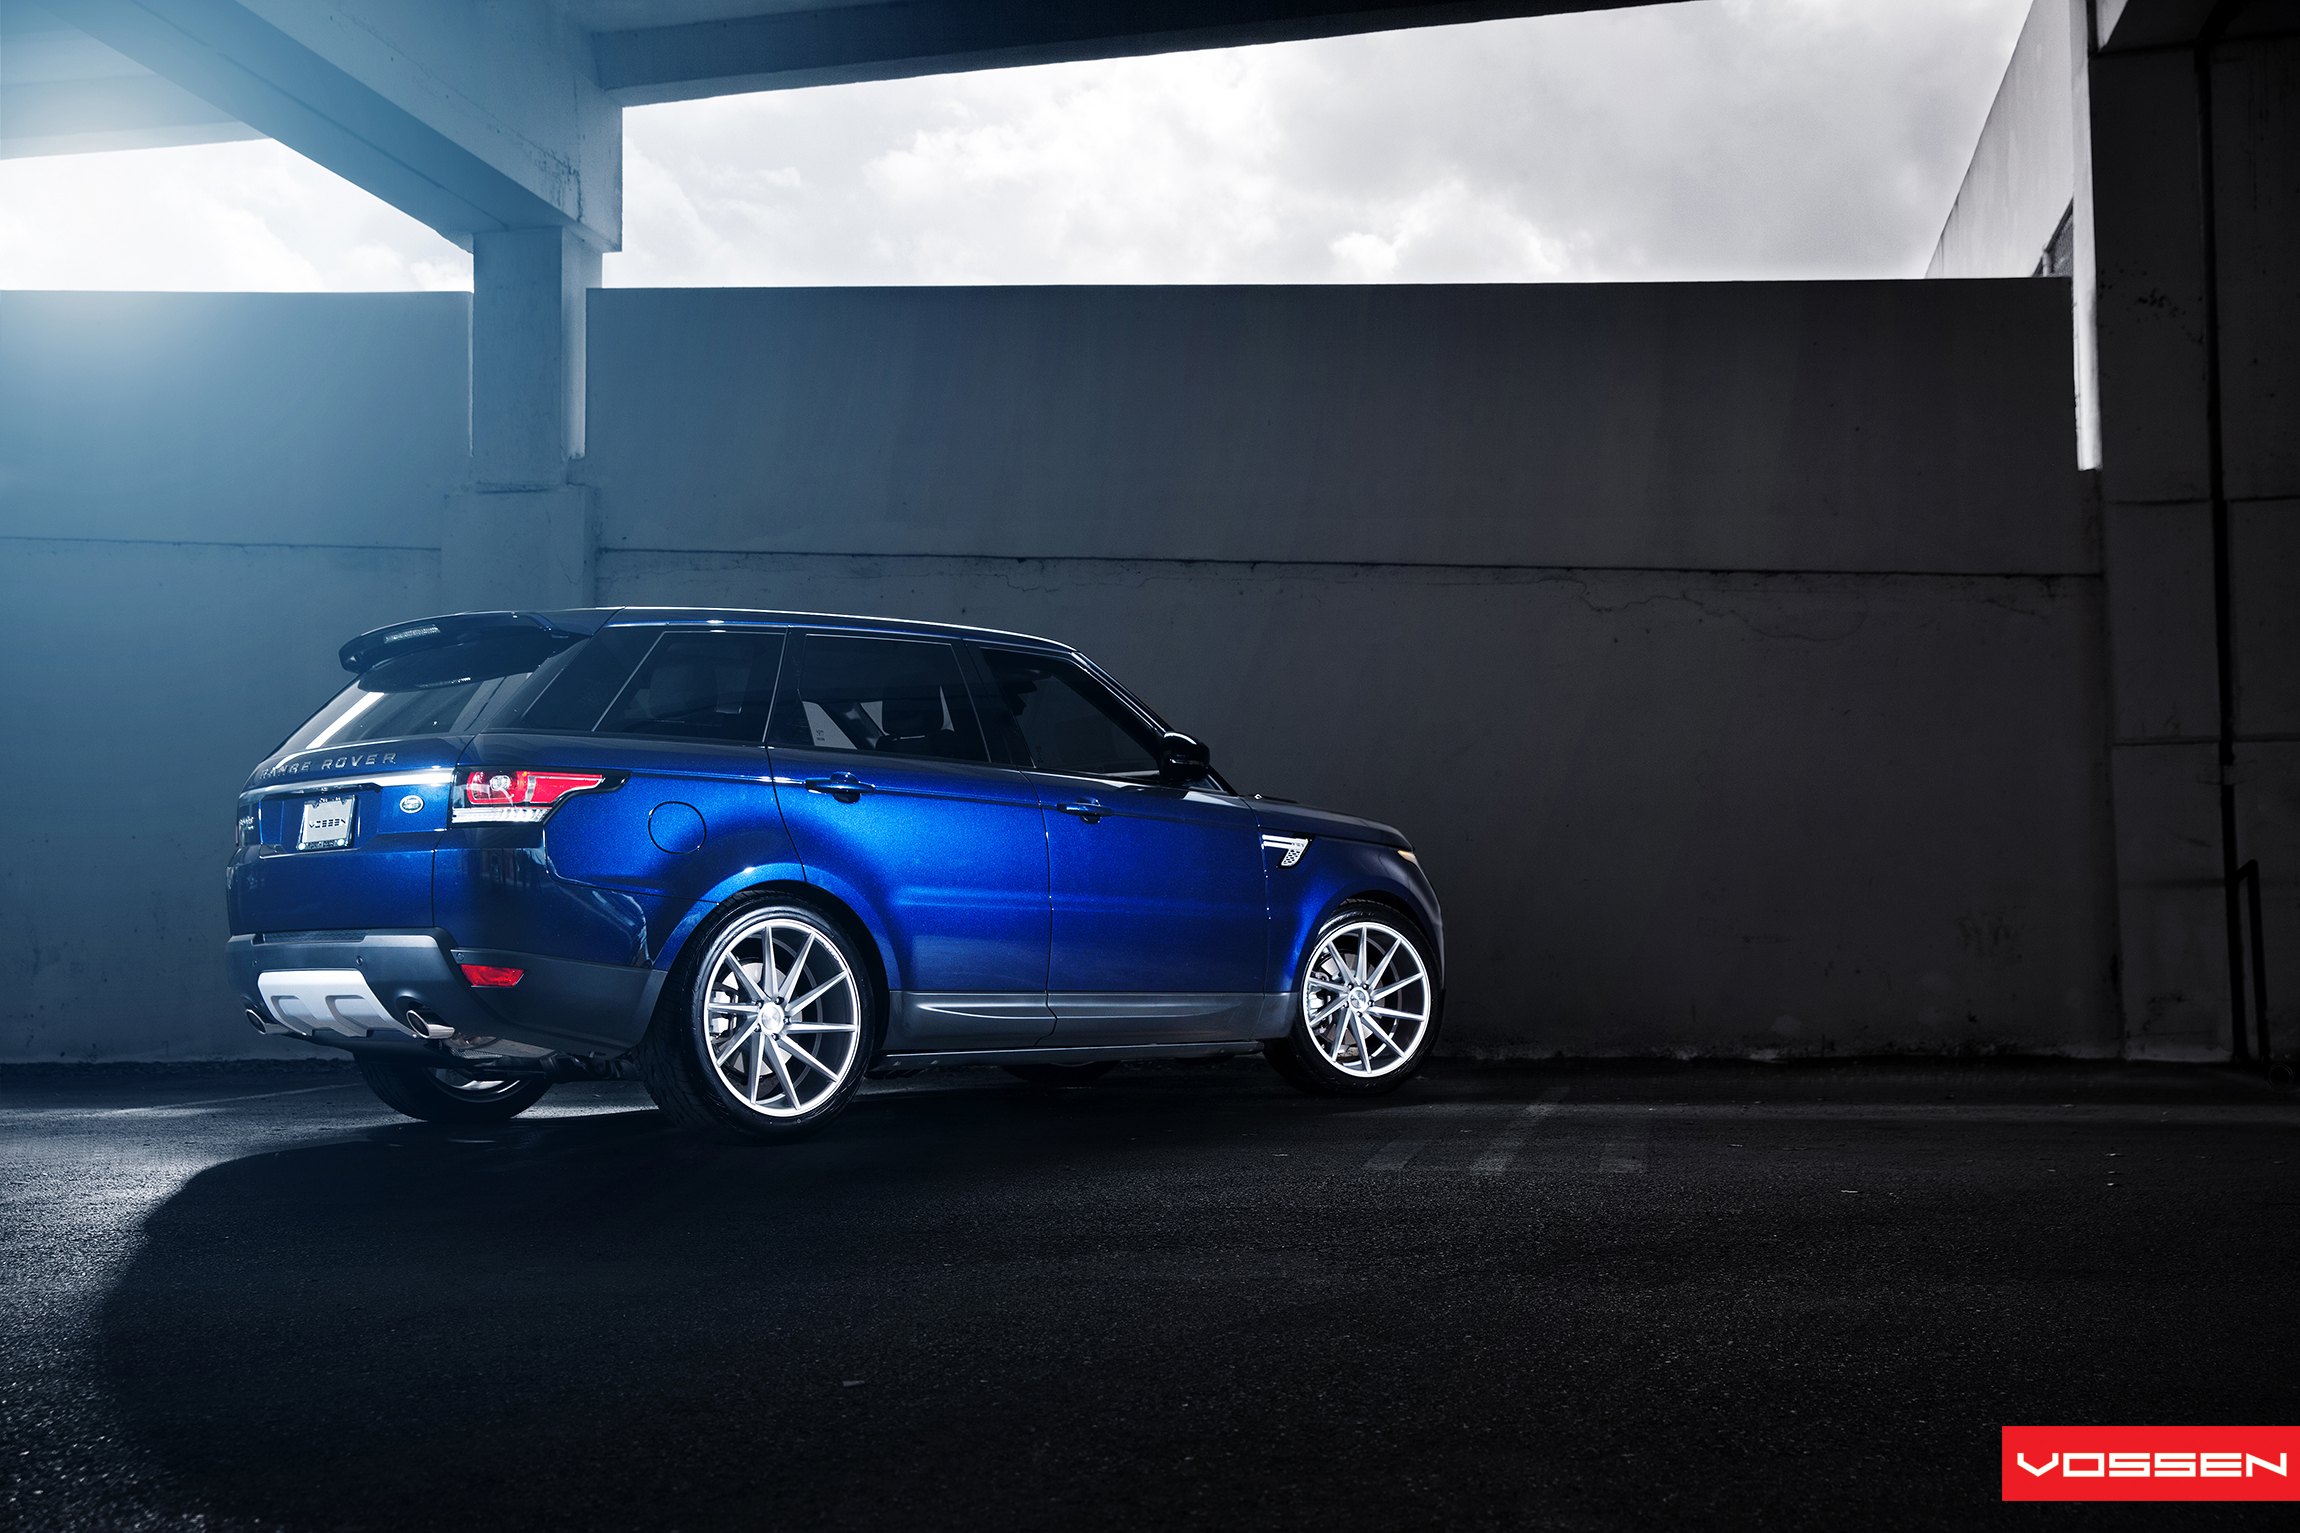 Retractable Running Boards on Blue Land Rover Sport - Photo by Vossen